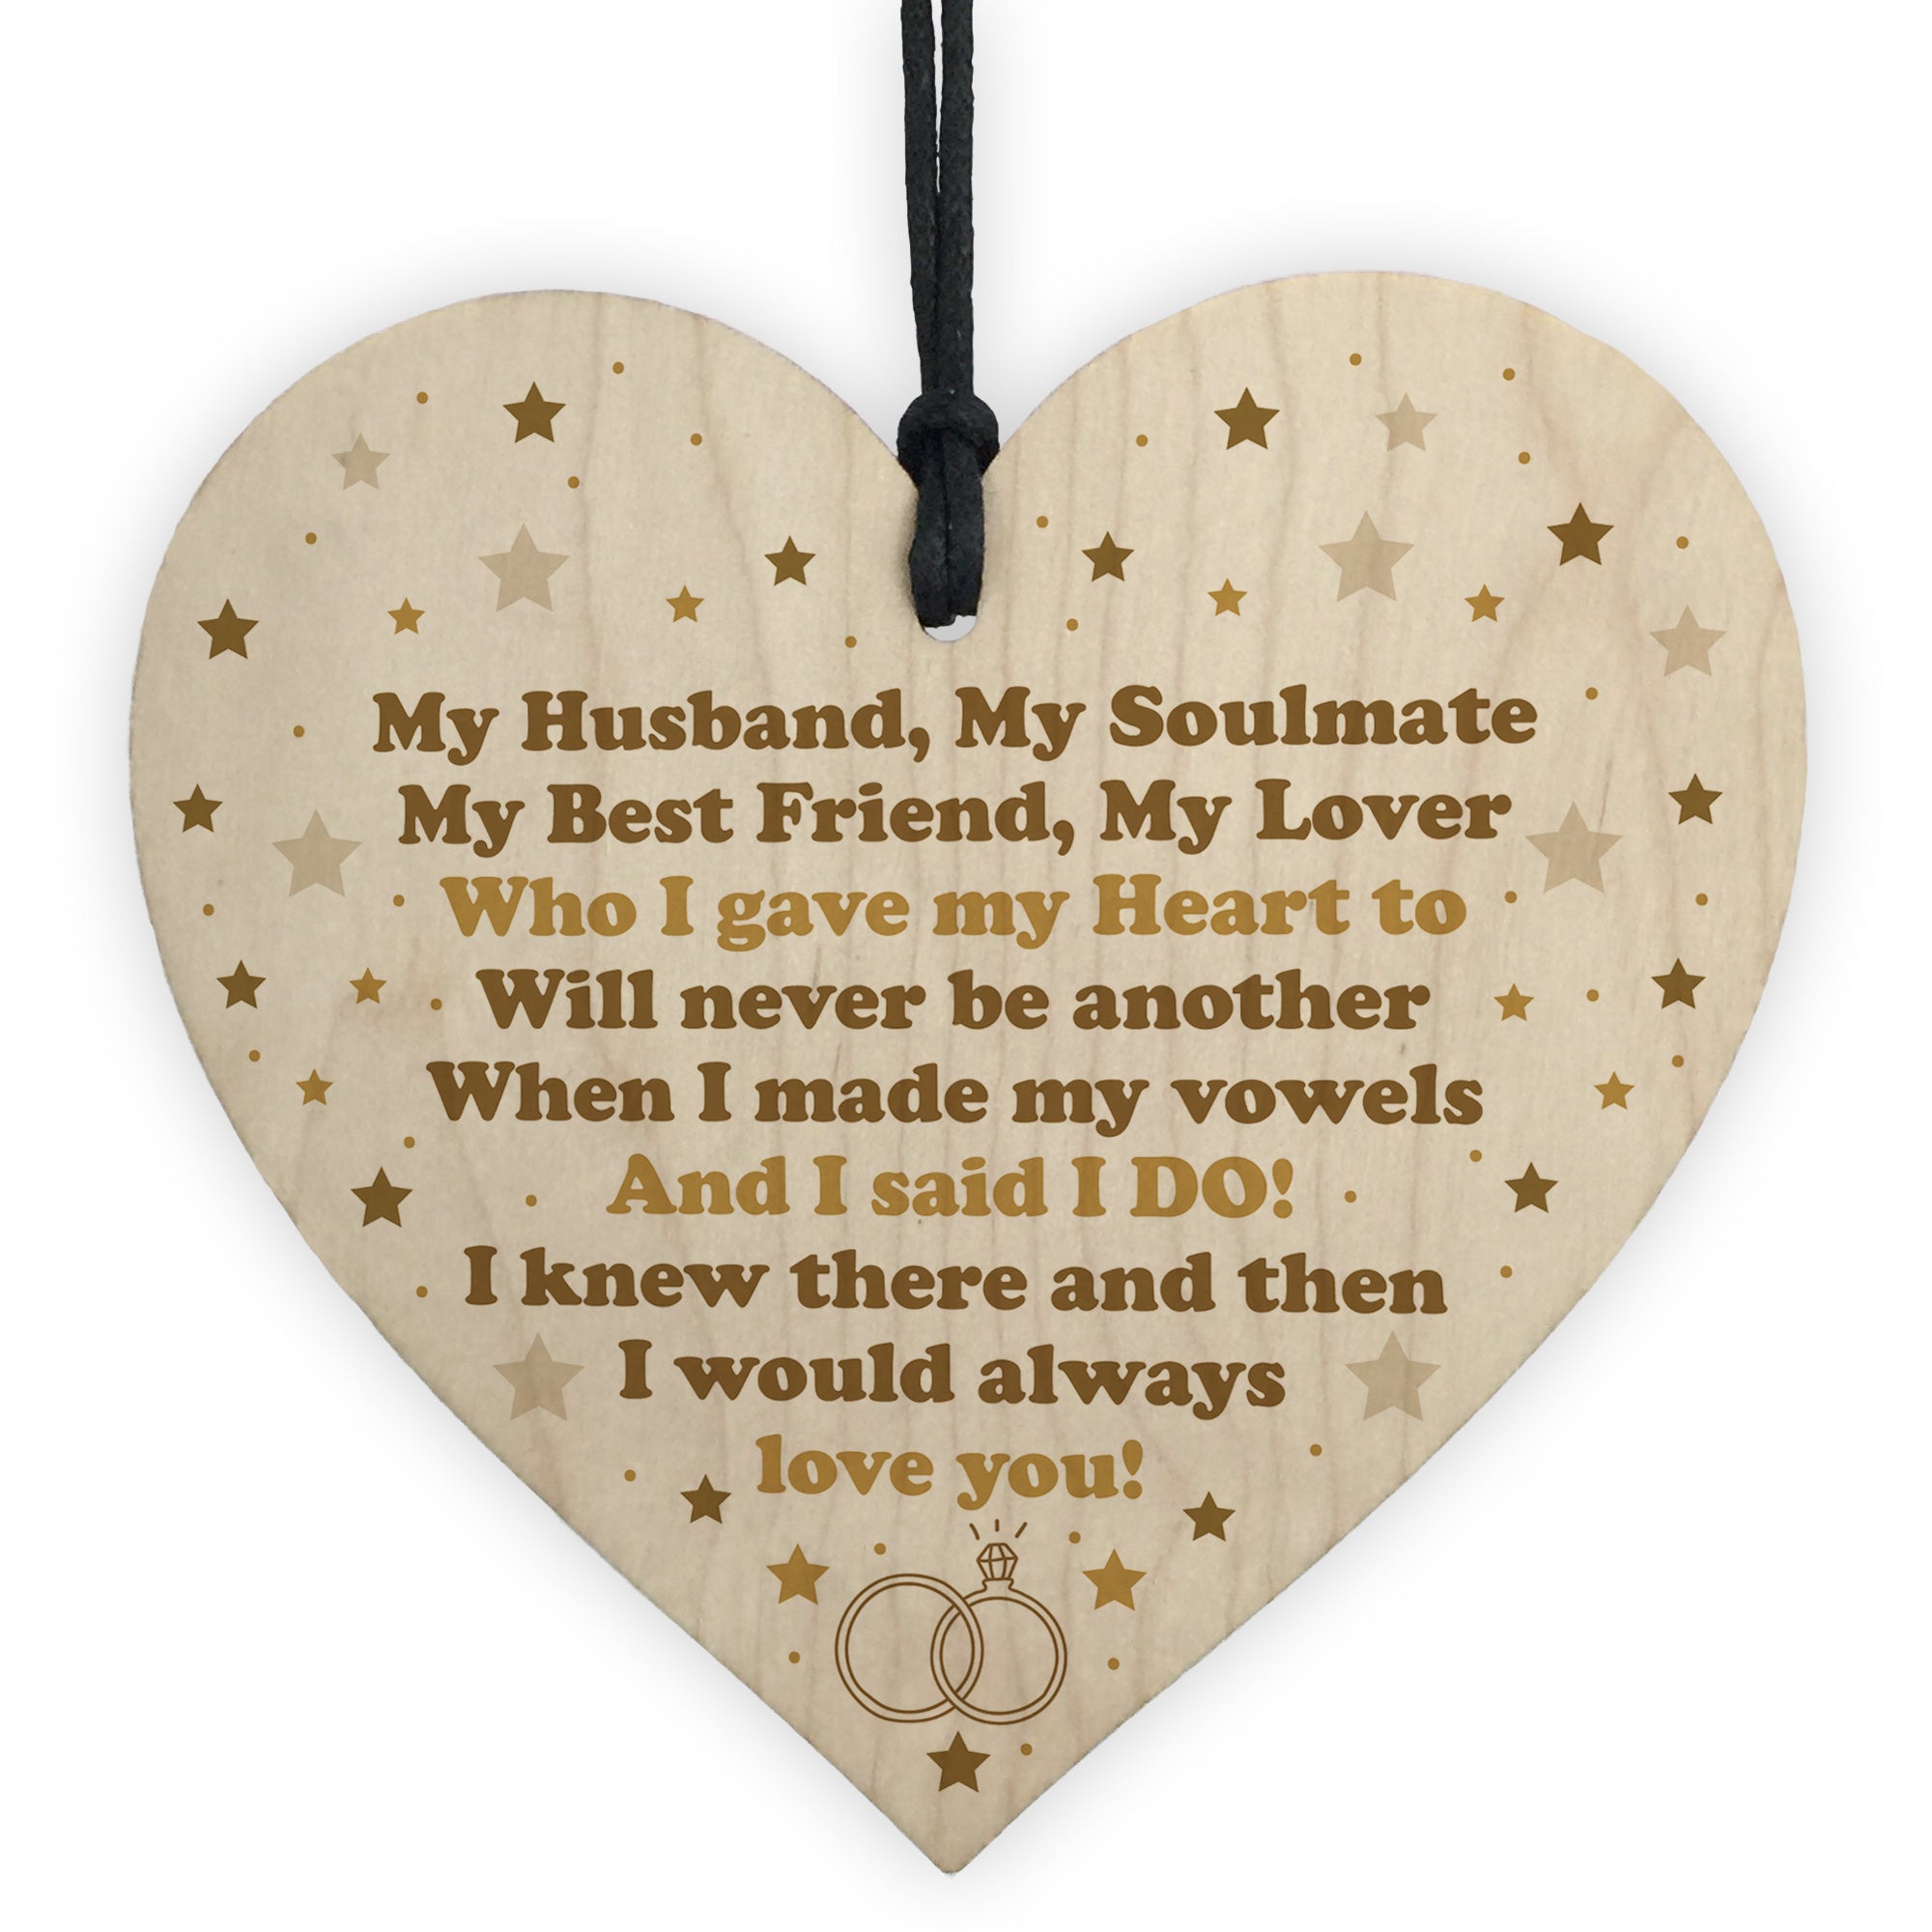 Diy valentines gifts for him, Handmade gifts for boyfriend, Diy gifts for  boyfriend